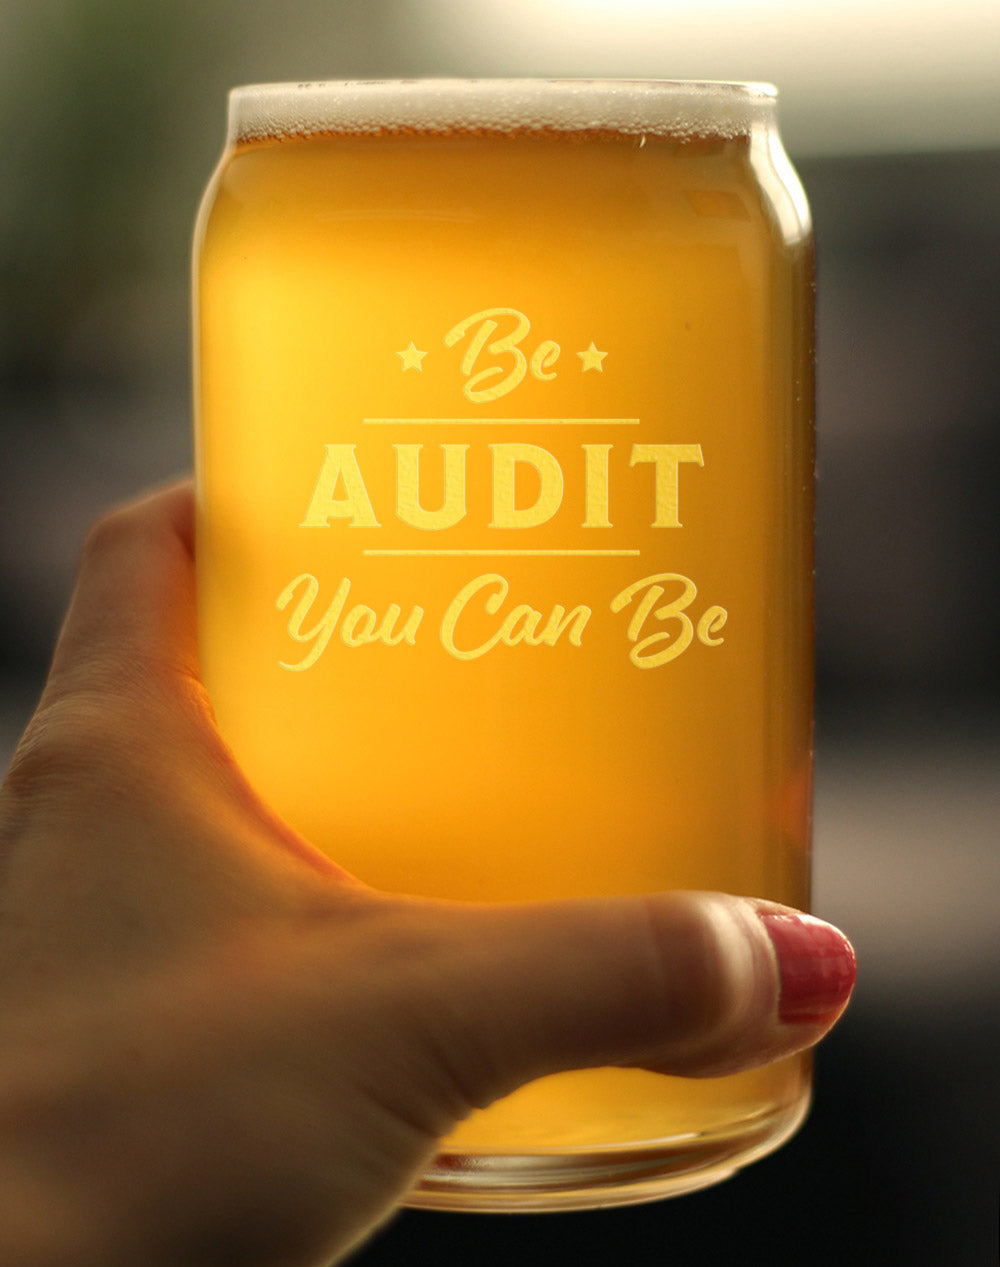 Be Audit You Can Be - Beer Can Pint Glass - Funny Accountant Gifts - Unique Accounting Gift for CPA - 16 oz Glasses